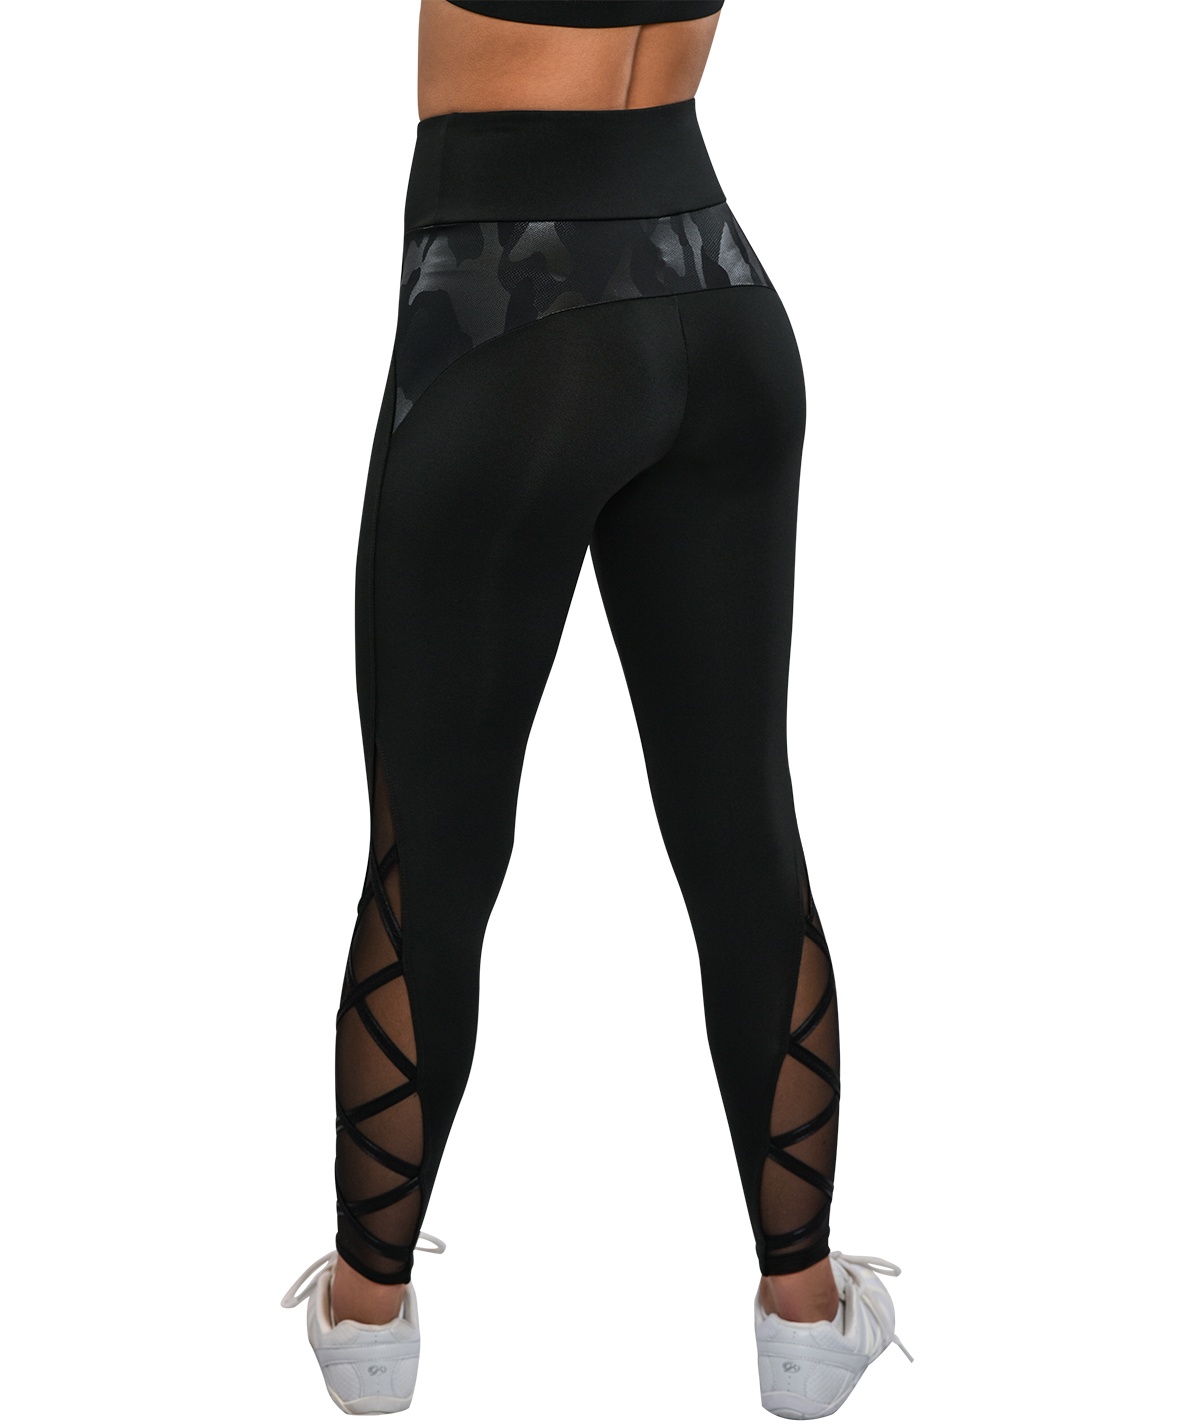 GK All Star Camou And Mesh High Waisted Criss Cross Capris